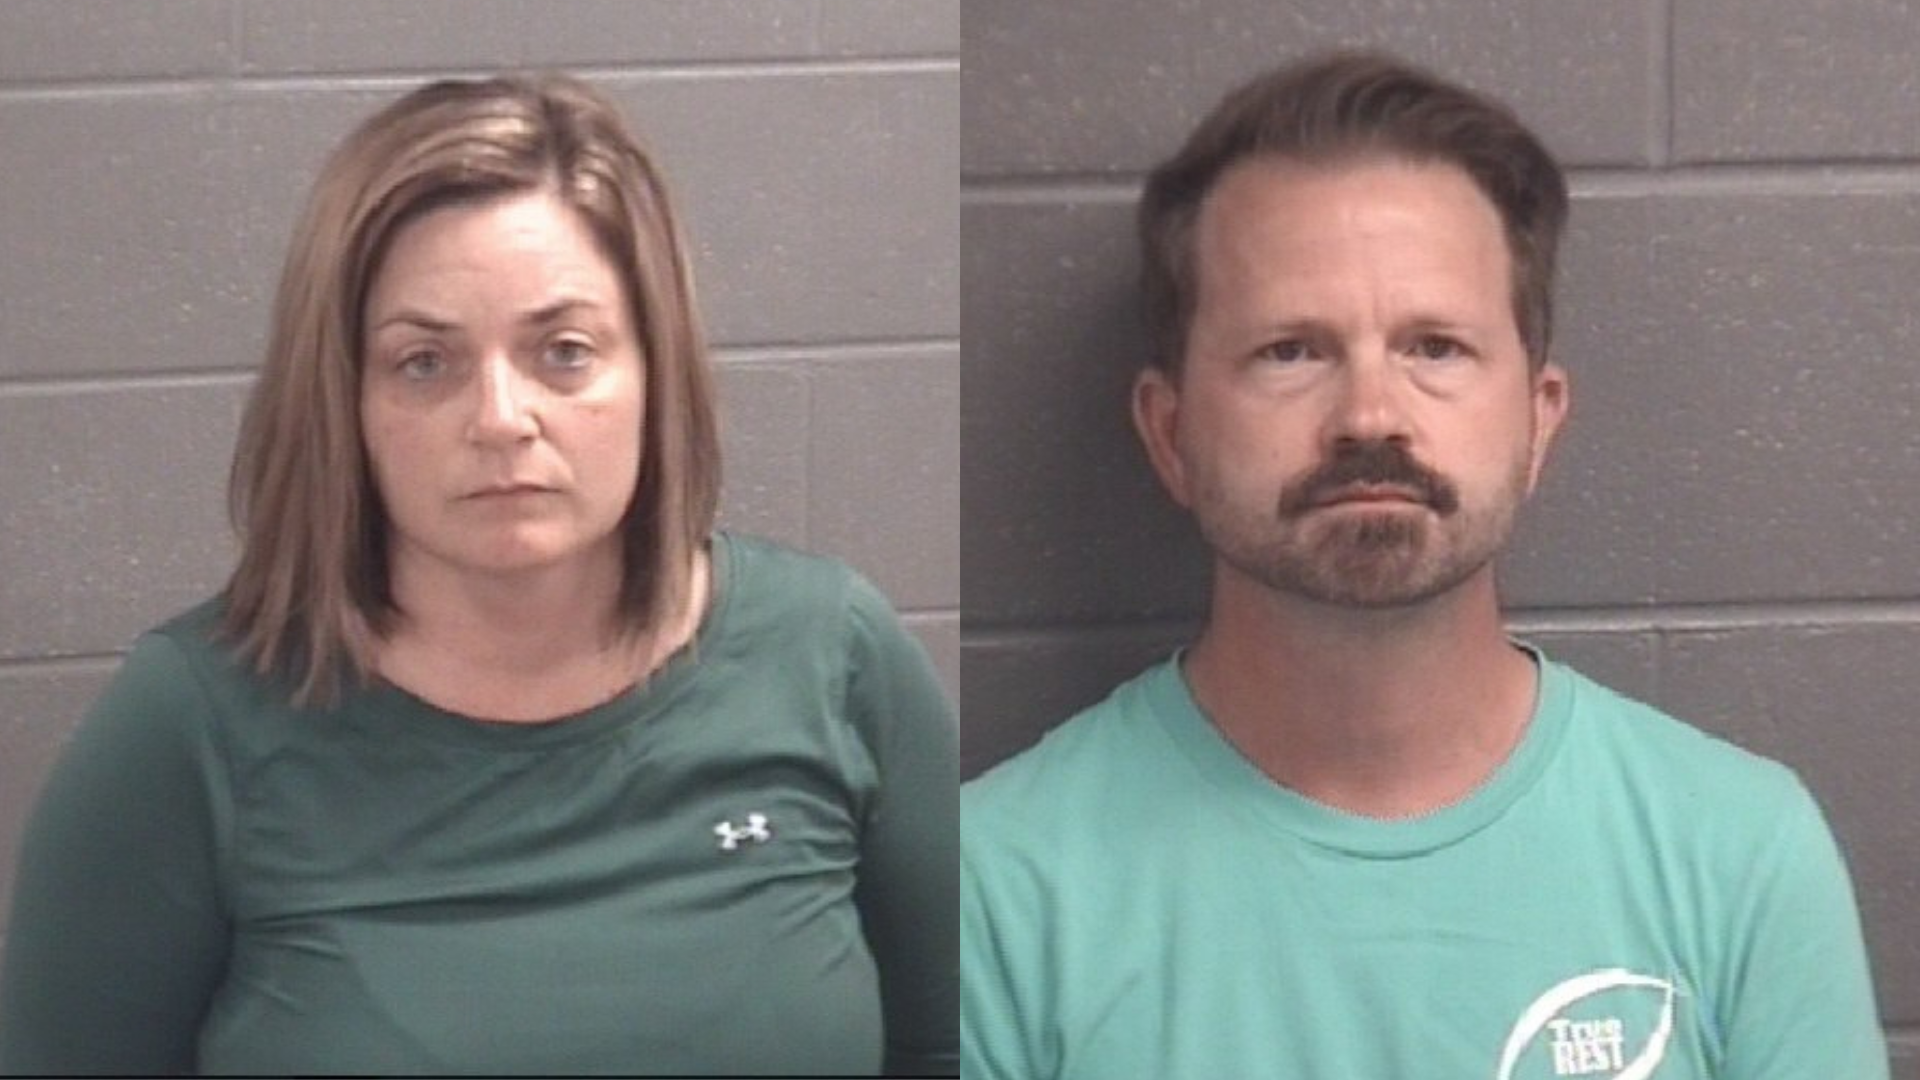 GRAPHIC Parents arrested after 10-year-old weighing 36 pounds found walking to grocery store, police hq pic